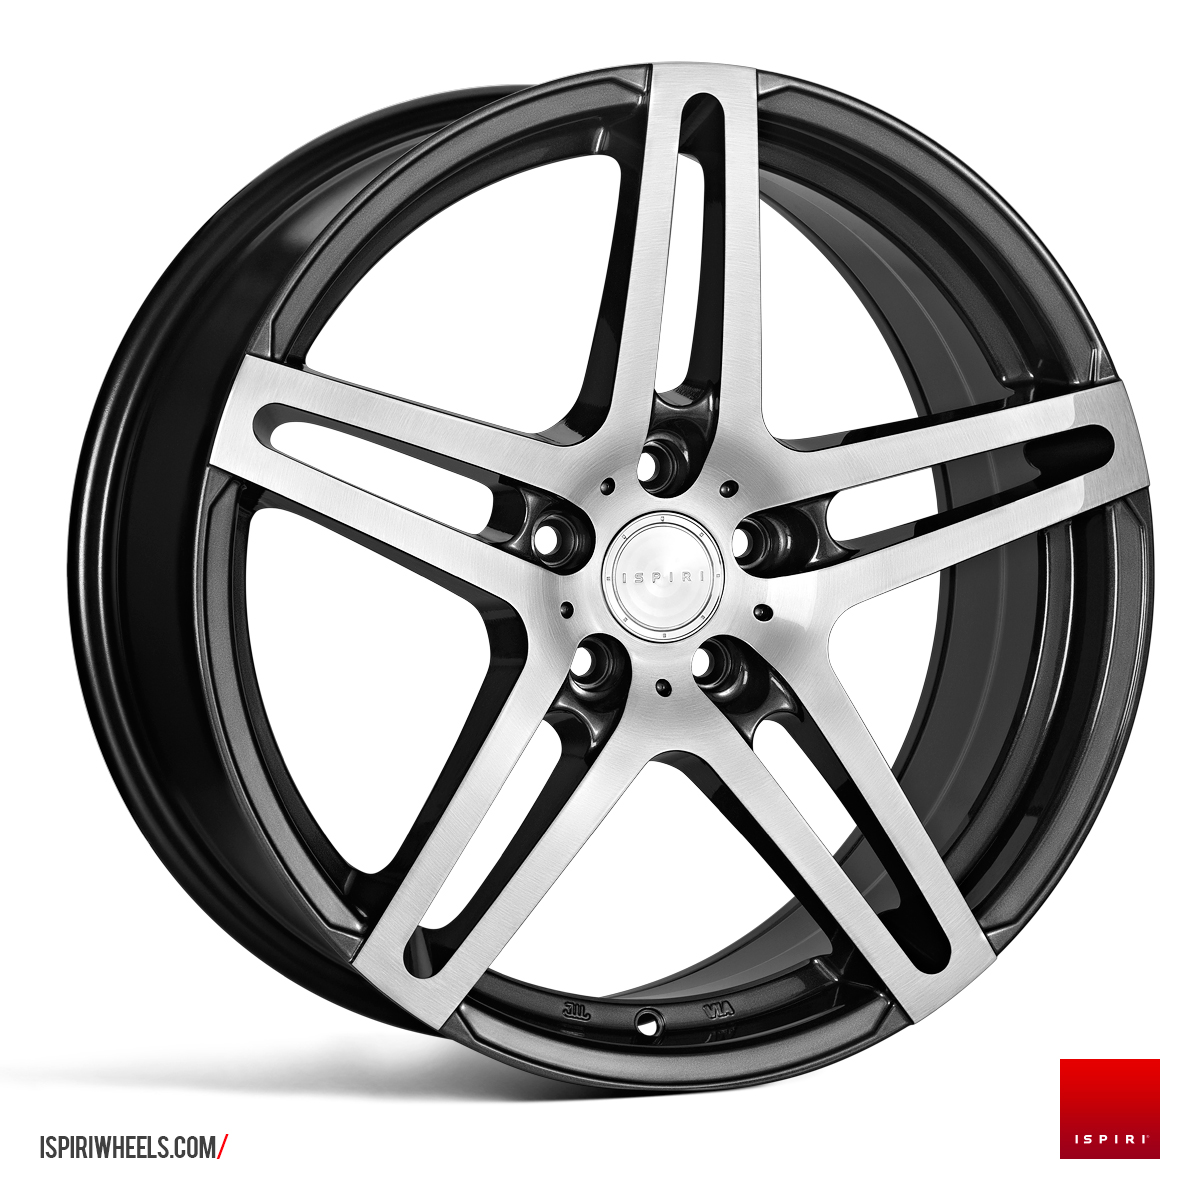 NEW 19  ISPIRI ISR12 ALLOY WHEELS IN GRAPHITE BRUSHED POLISH  DEEPER 9 5  ALL ROUND